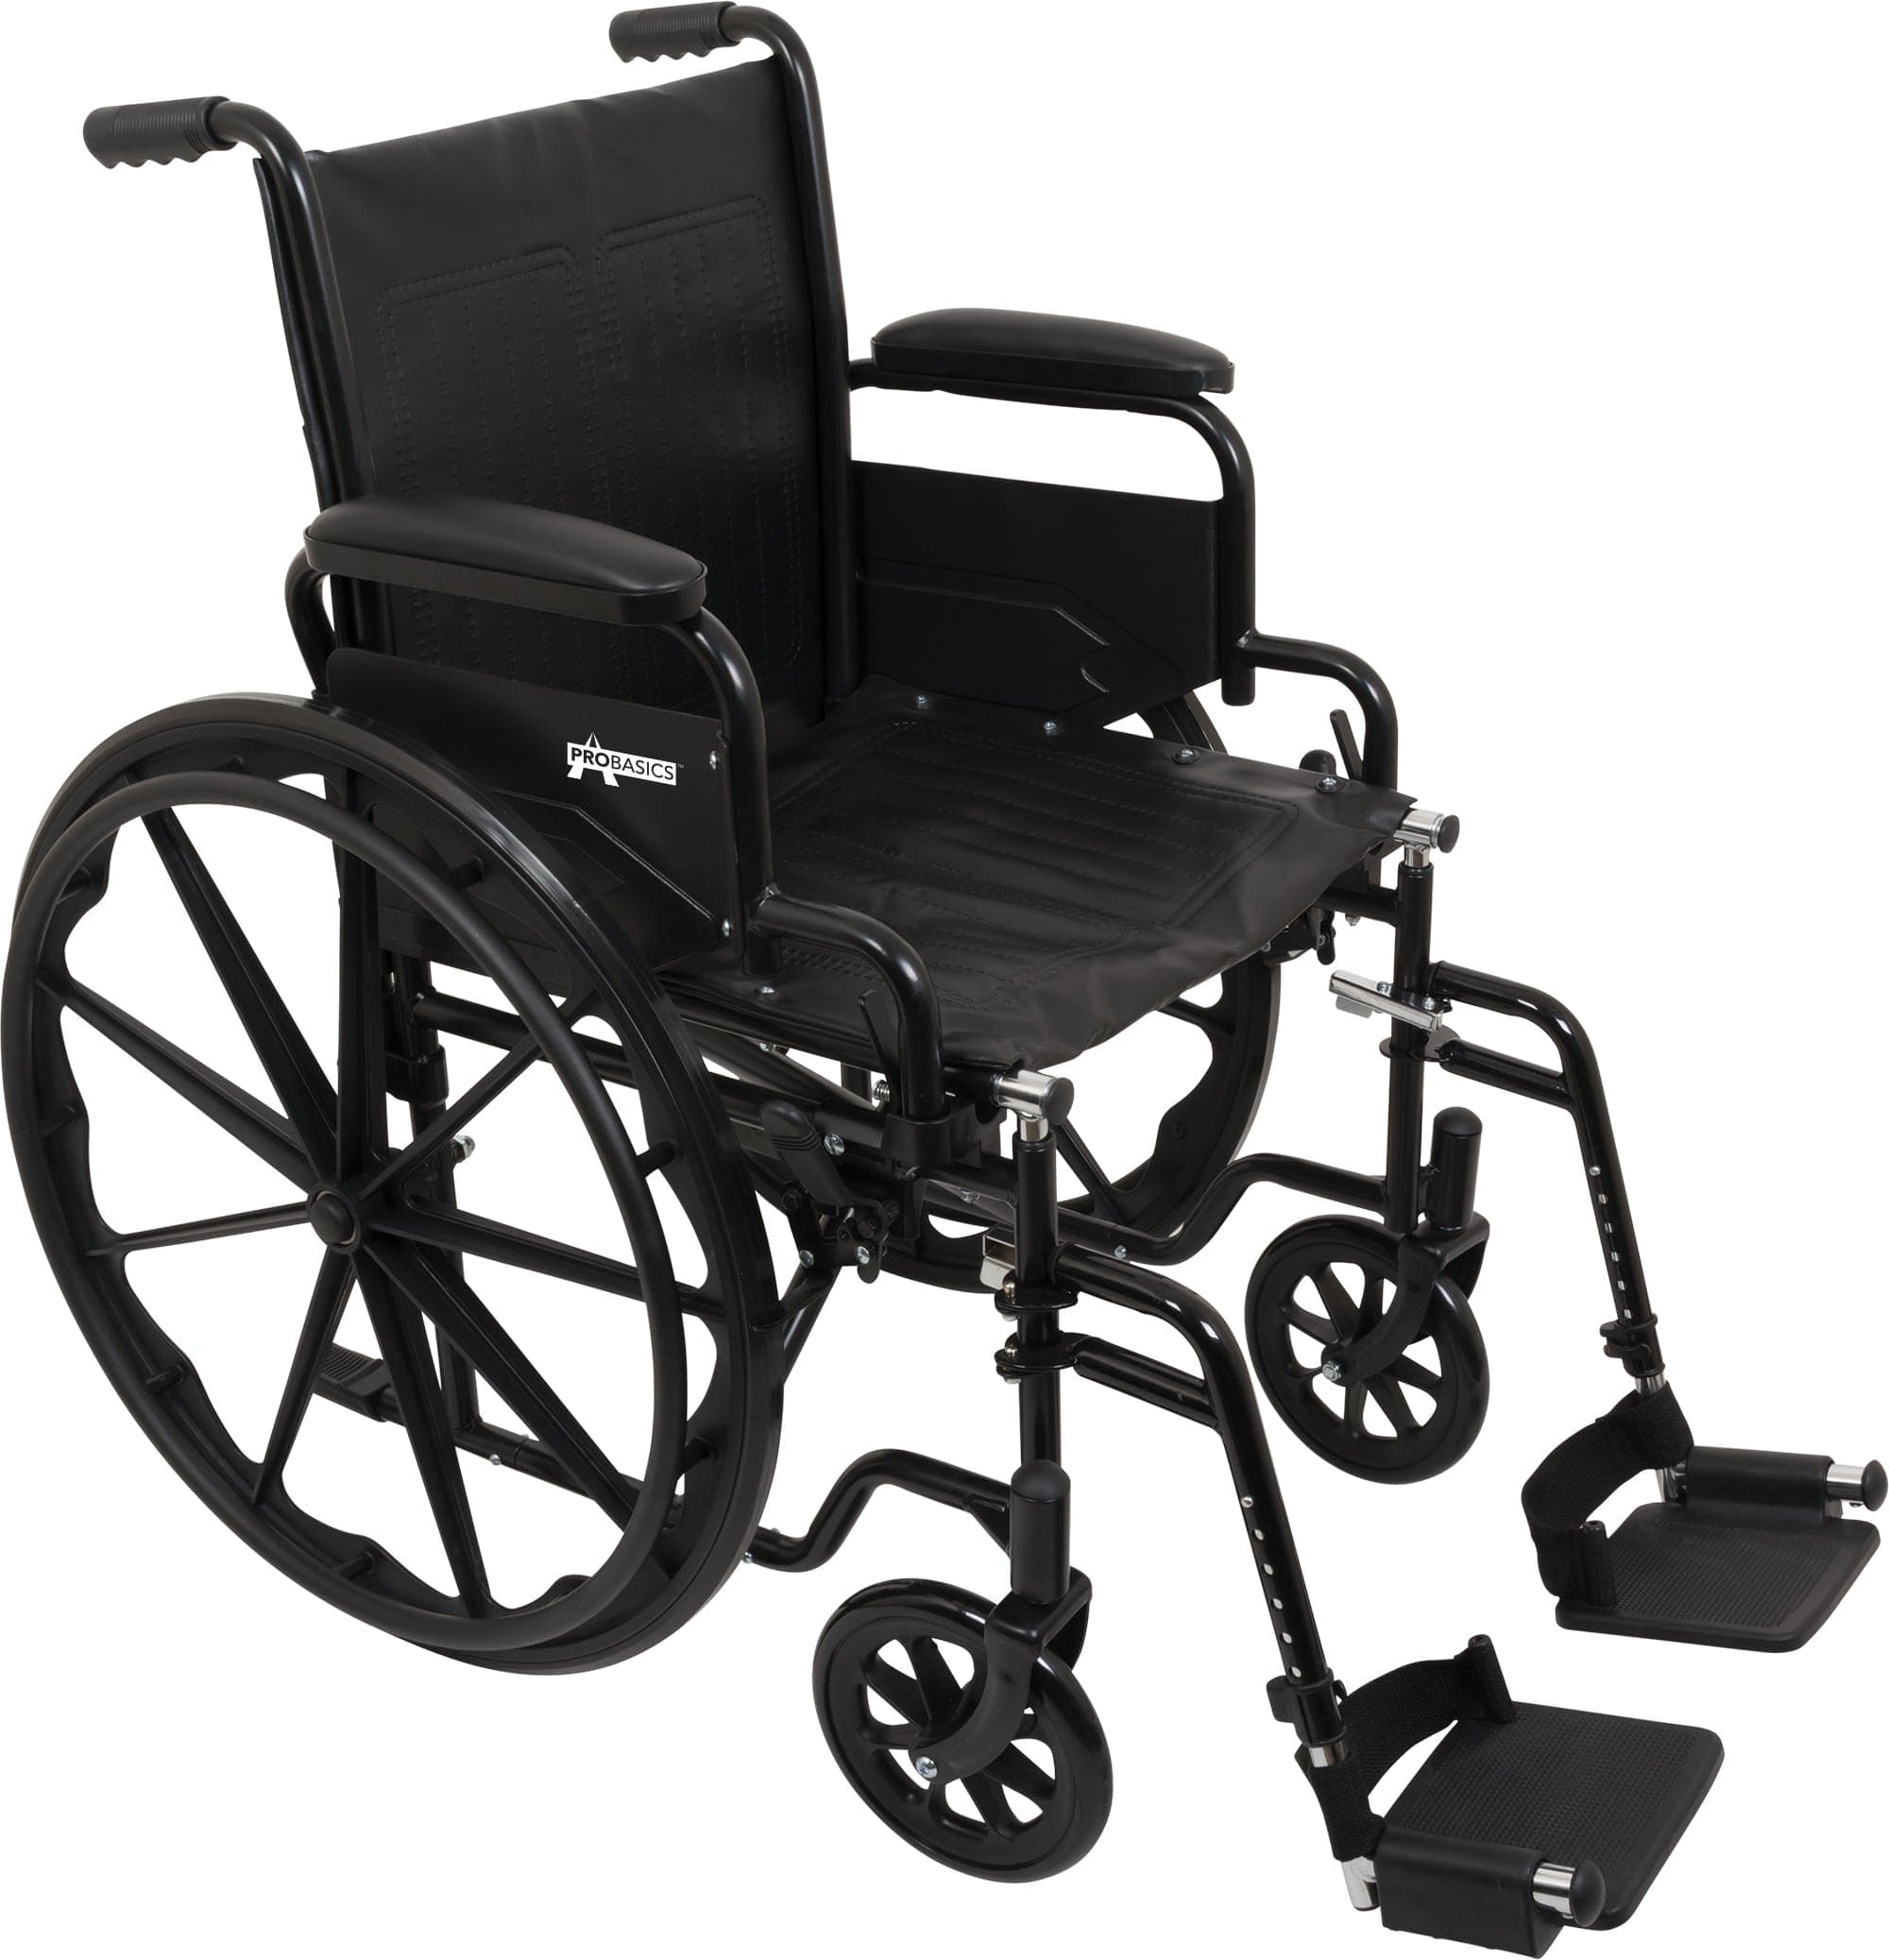 Compass Health Compass Health ProBasics K1 Wheelchair with 18-inch x 16-inch Seat, WC11816DS